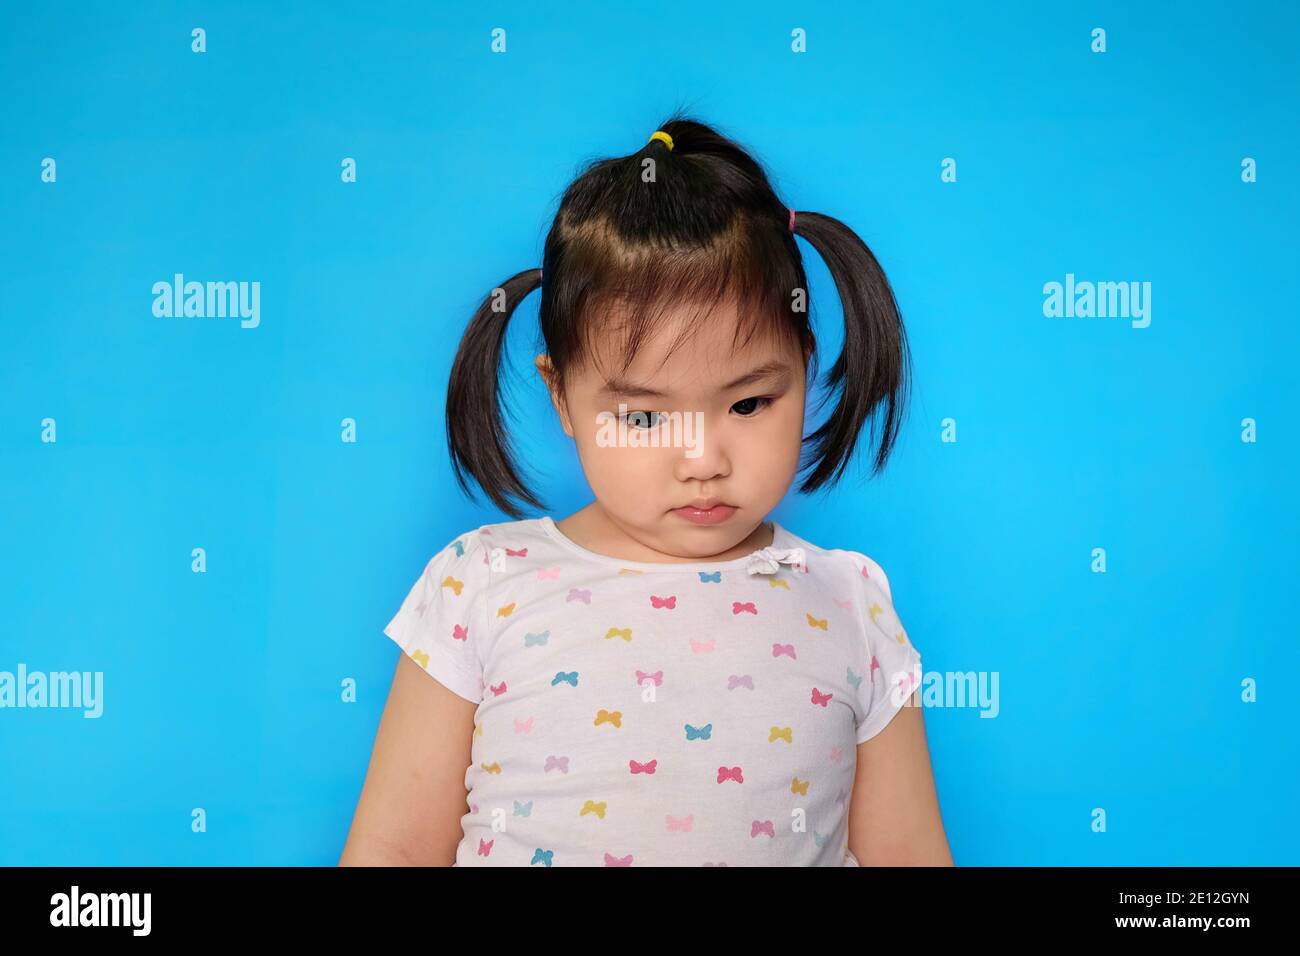 A cute young chubby Asian girl making a sad face, thinking about her punishment. Plain light blue background. Stock Photo